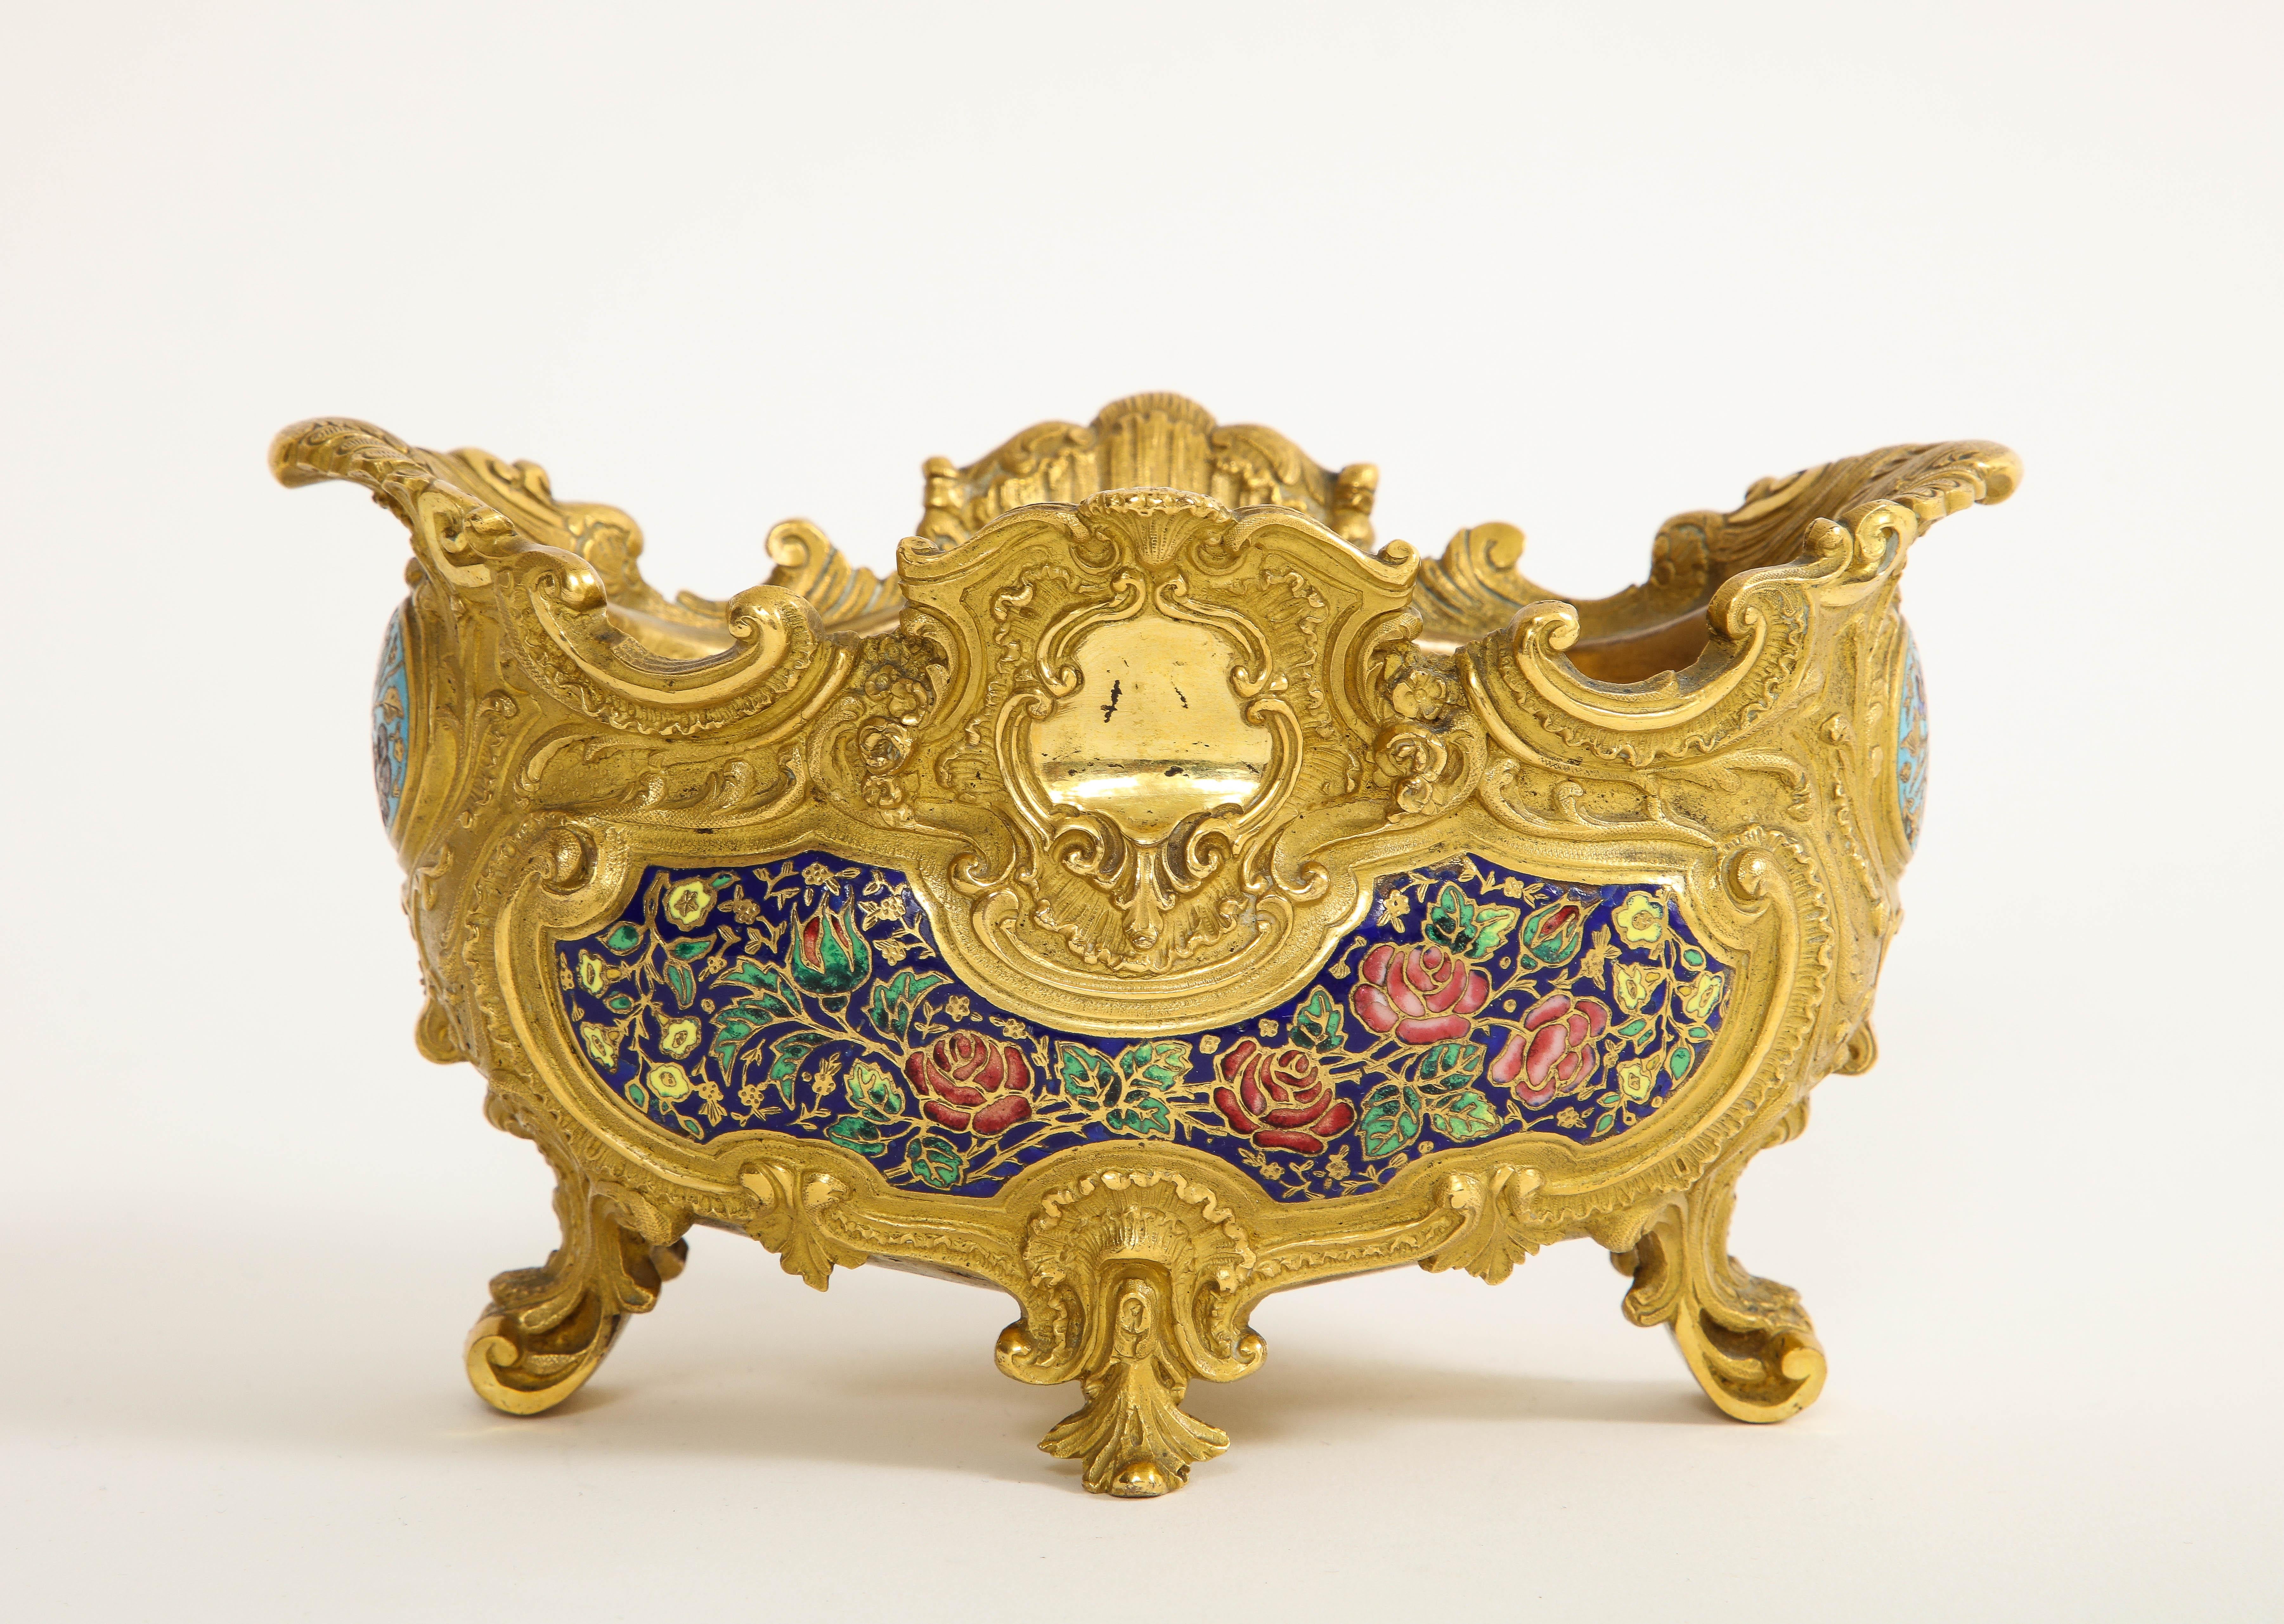 19th Century A 19th C. French Ormolu Champlevé Enamel Footed Centerpiece, Att. Barbedienne For Sale